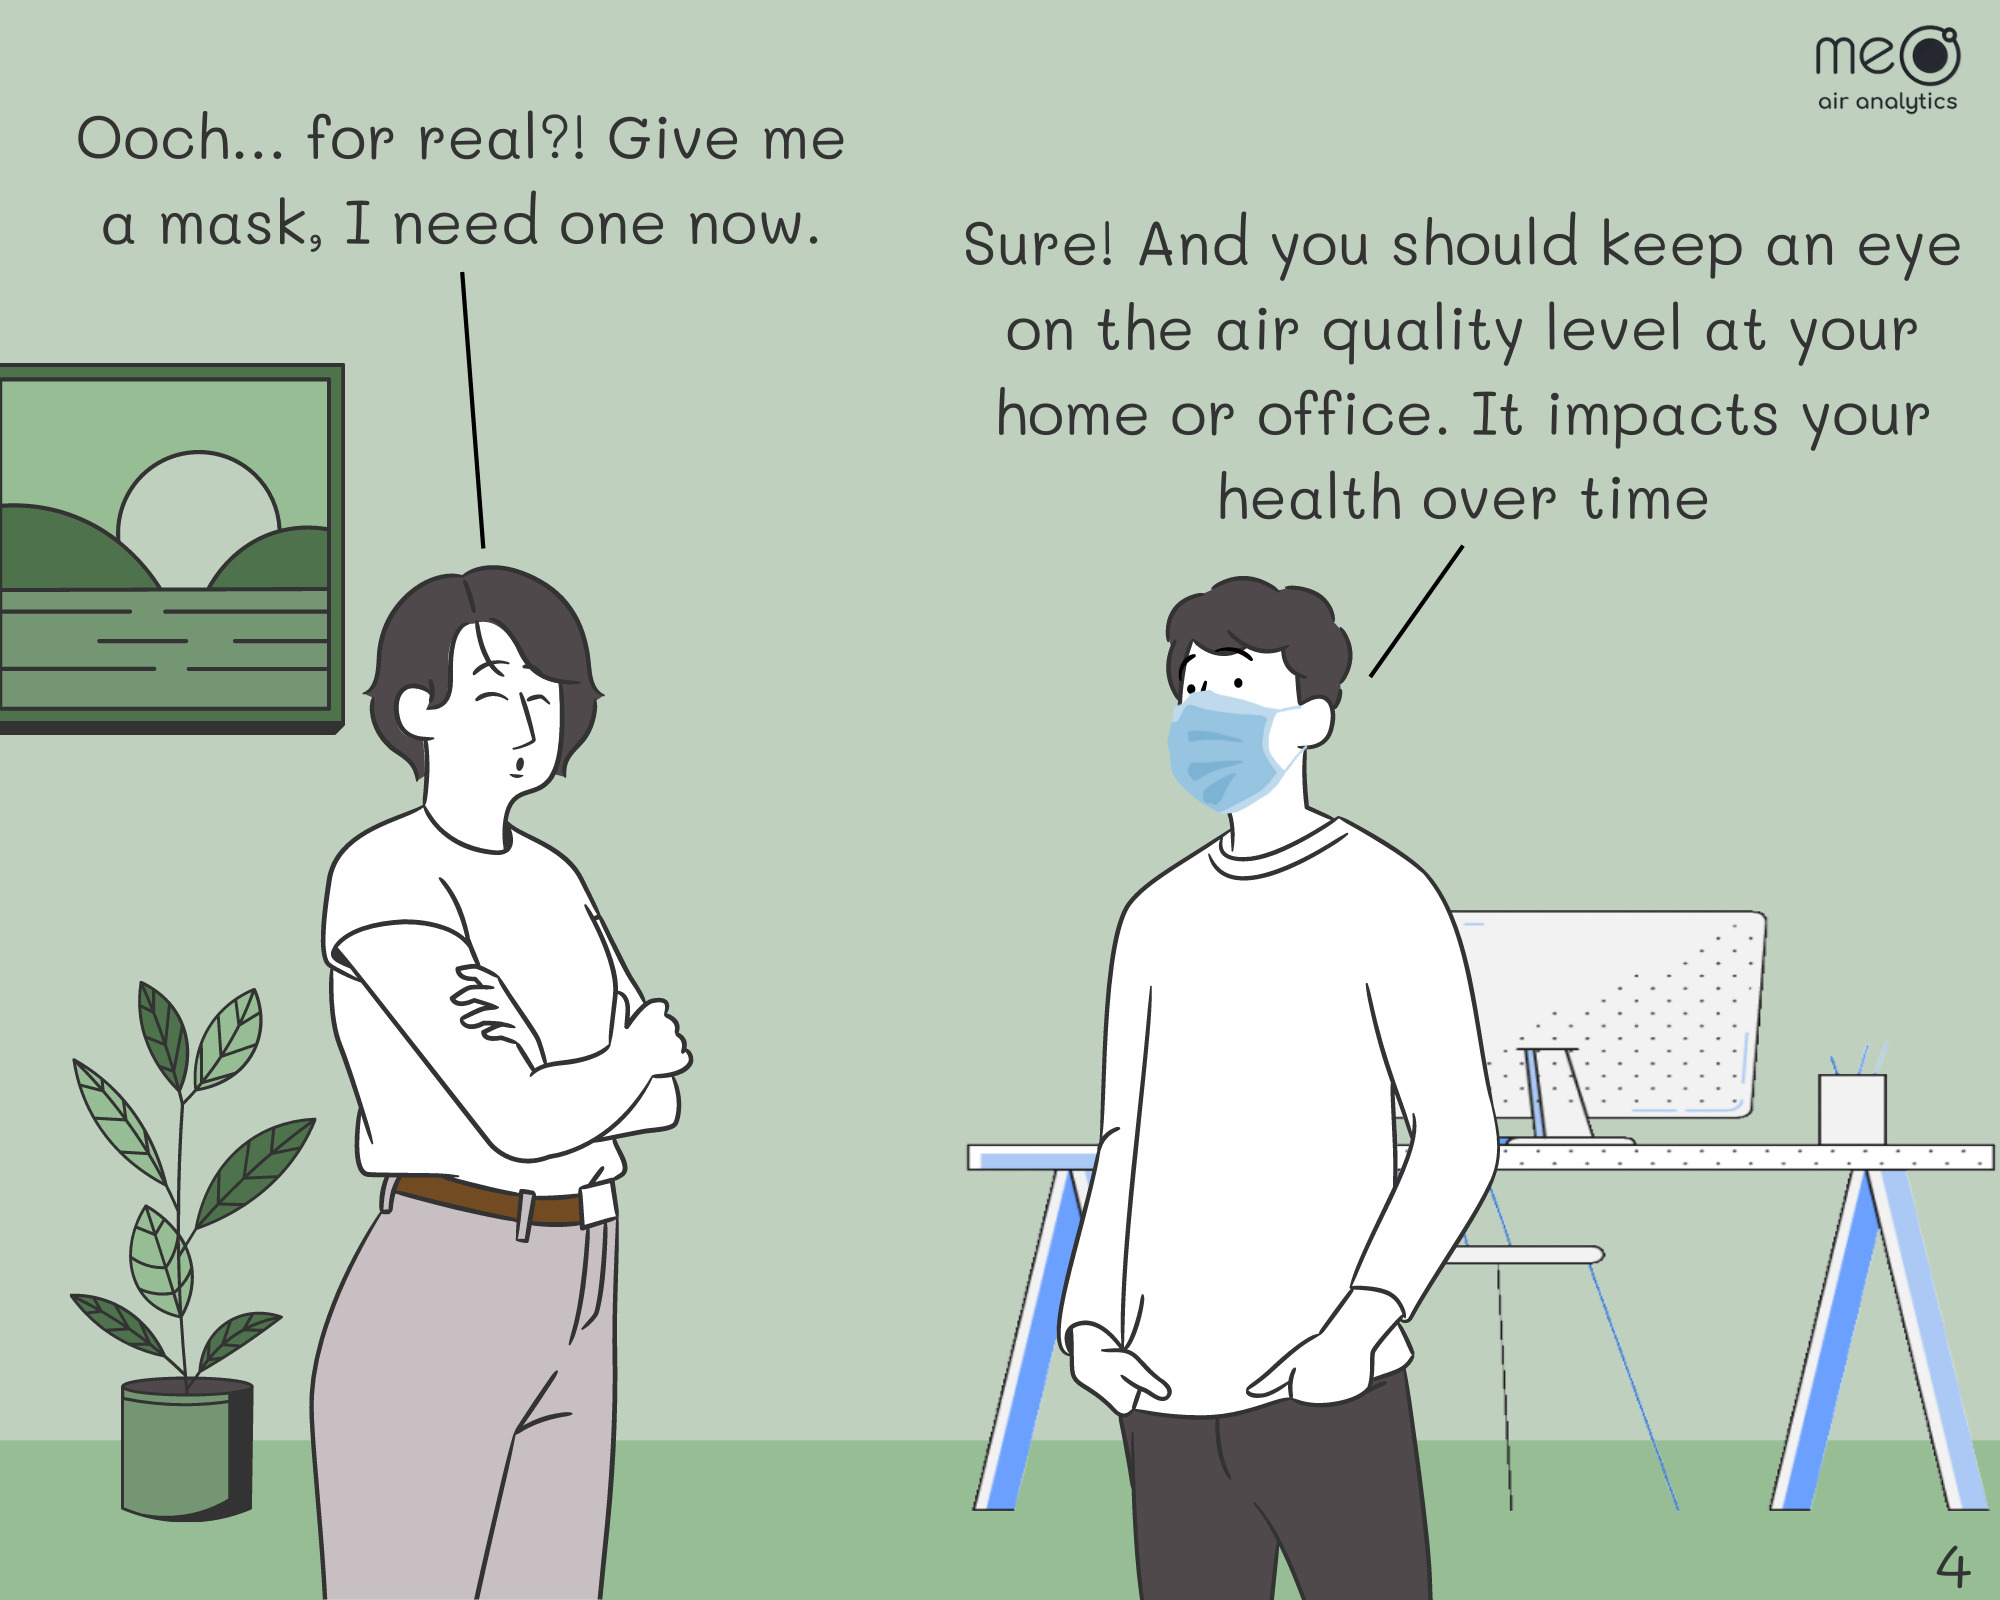 Joyce: Ooch… for real?! Give me a mask, I need one now. Tim: Sure! And you should keep an eye on the air quality level at your home or office. It impacts your health over time